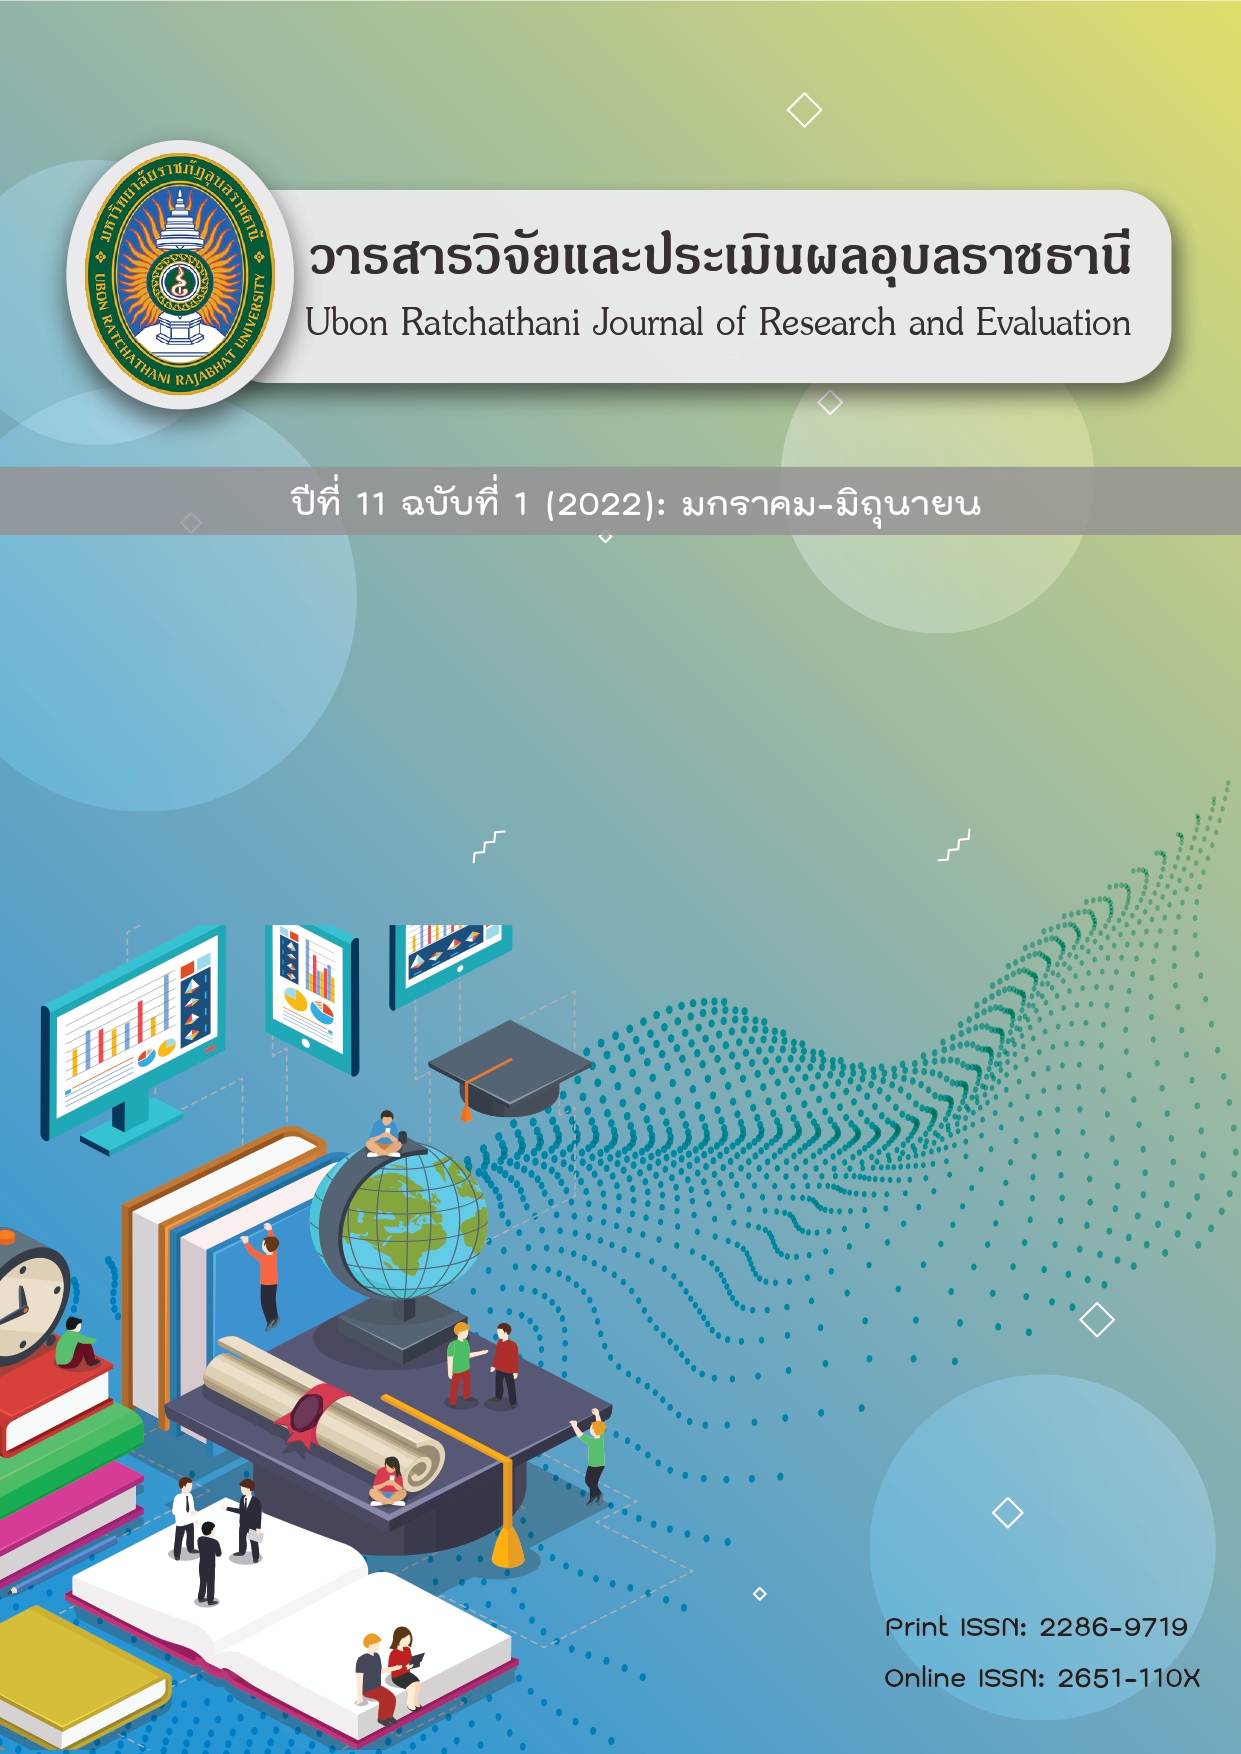 					View Vol. 11 No. 1 (2022): Ubon Ratchathani Journal of Research and Evaluation
				